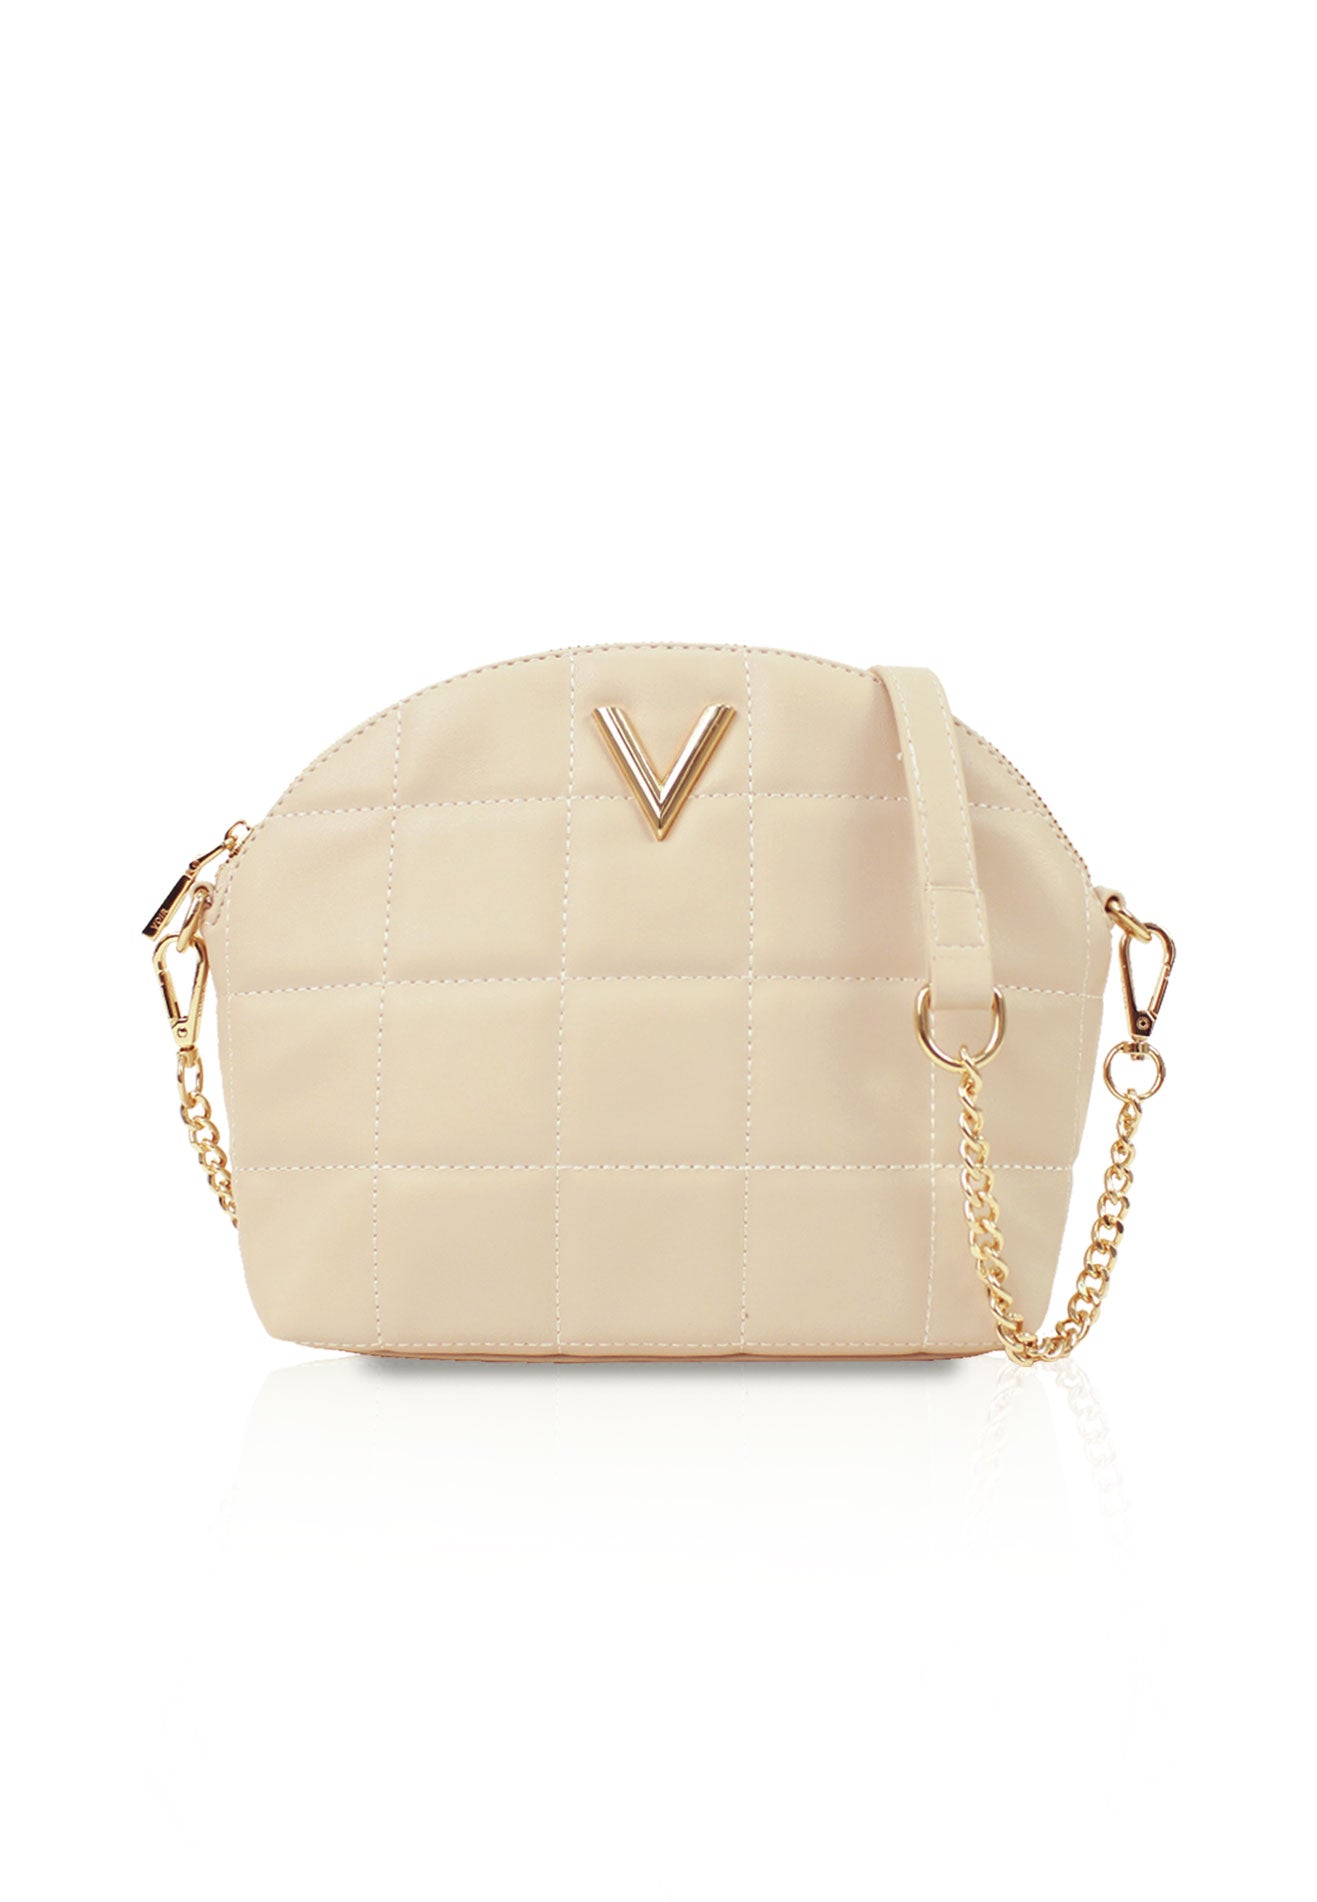 VOIR Half Moon Geometric Iconic 'V' Quilted Sling Bag – VOIR GALLERY